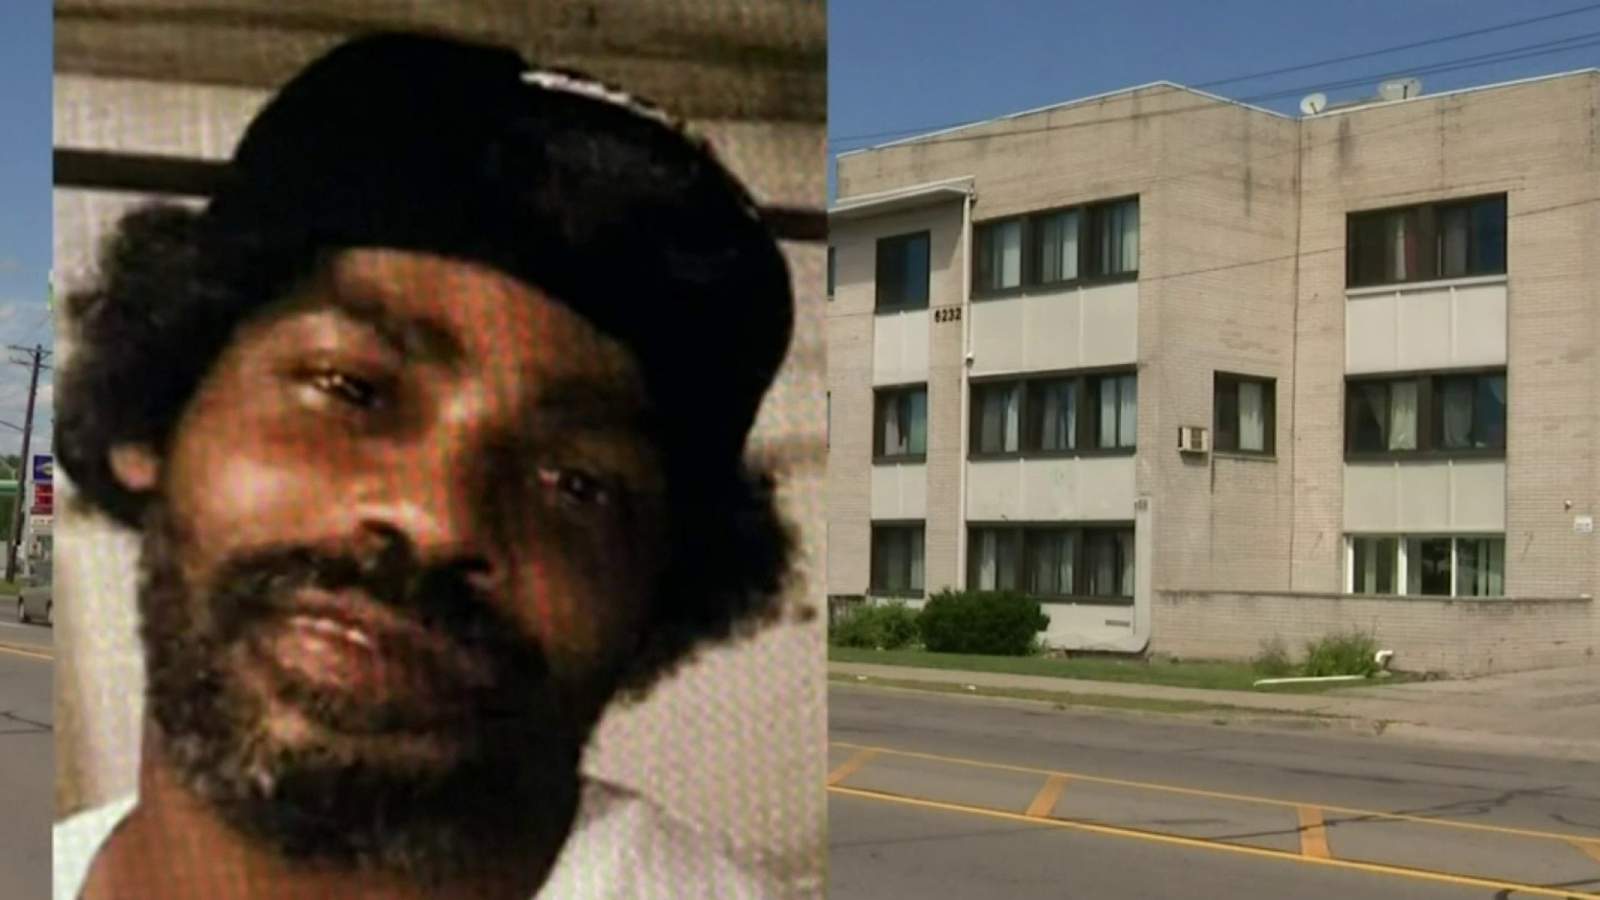 Man who vanished from Detroit senior center 5 months ago found dead in facility’s basement